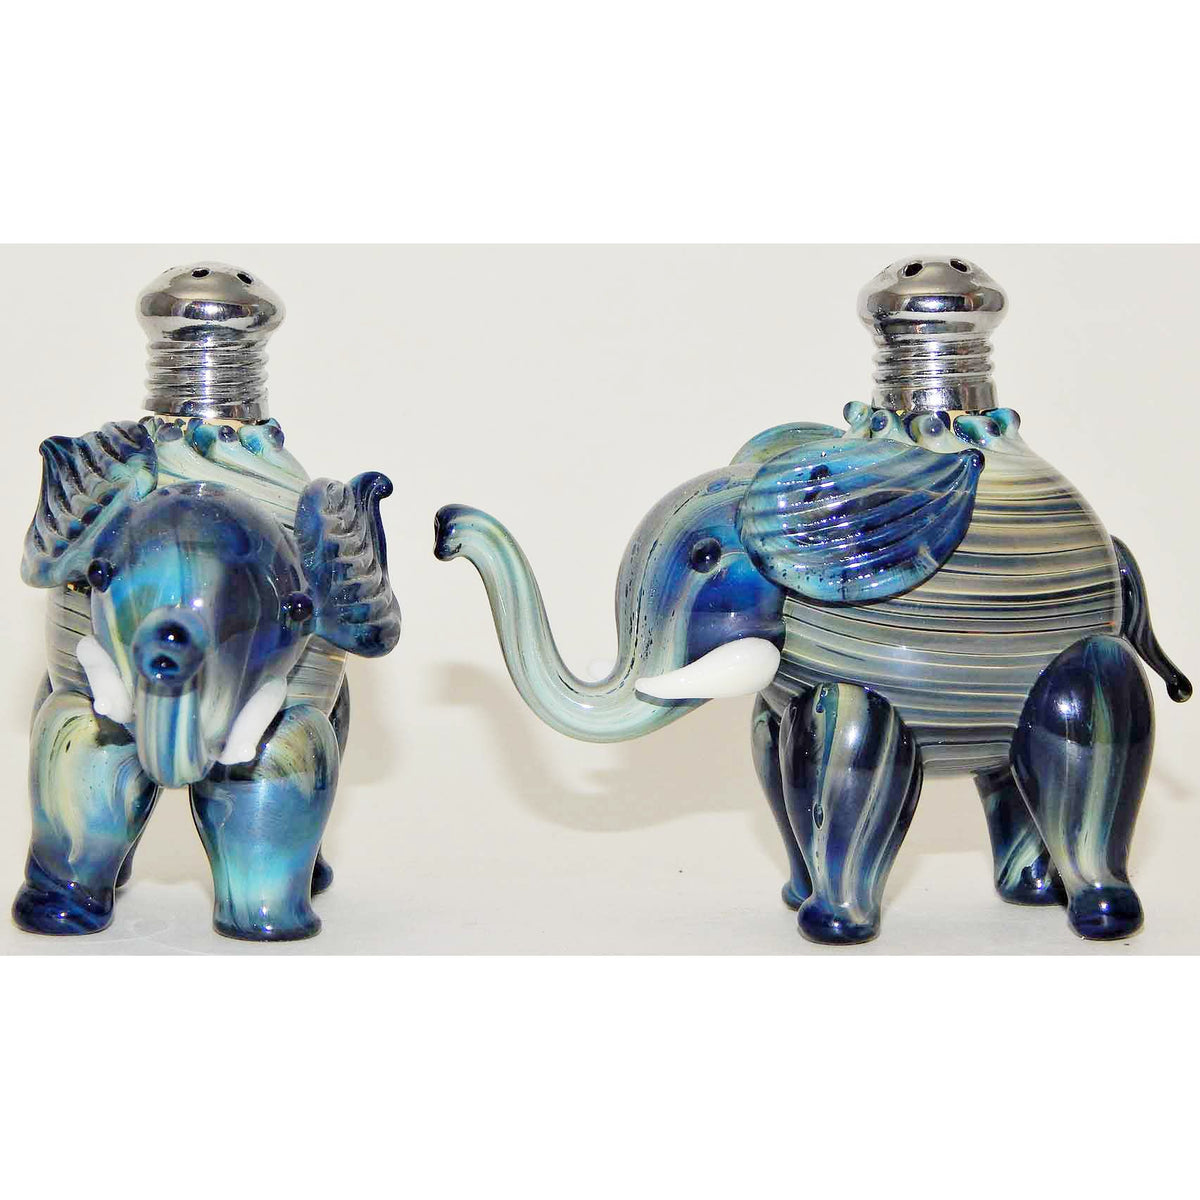 Donkey and Elephant Mix and Match 275 Blown Glass Salt and Pepper Shaker,  Four Sisters Art Glass – Sweetheart Gallery: Contemporary Craft Gallery,  Fine American Craft, Art, Design, Handmade Home & Personal Accessories